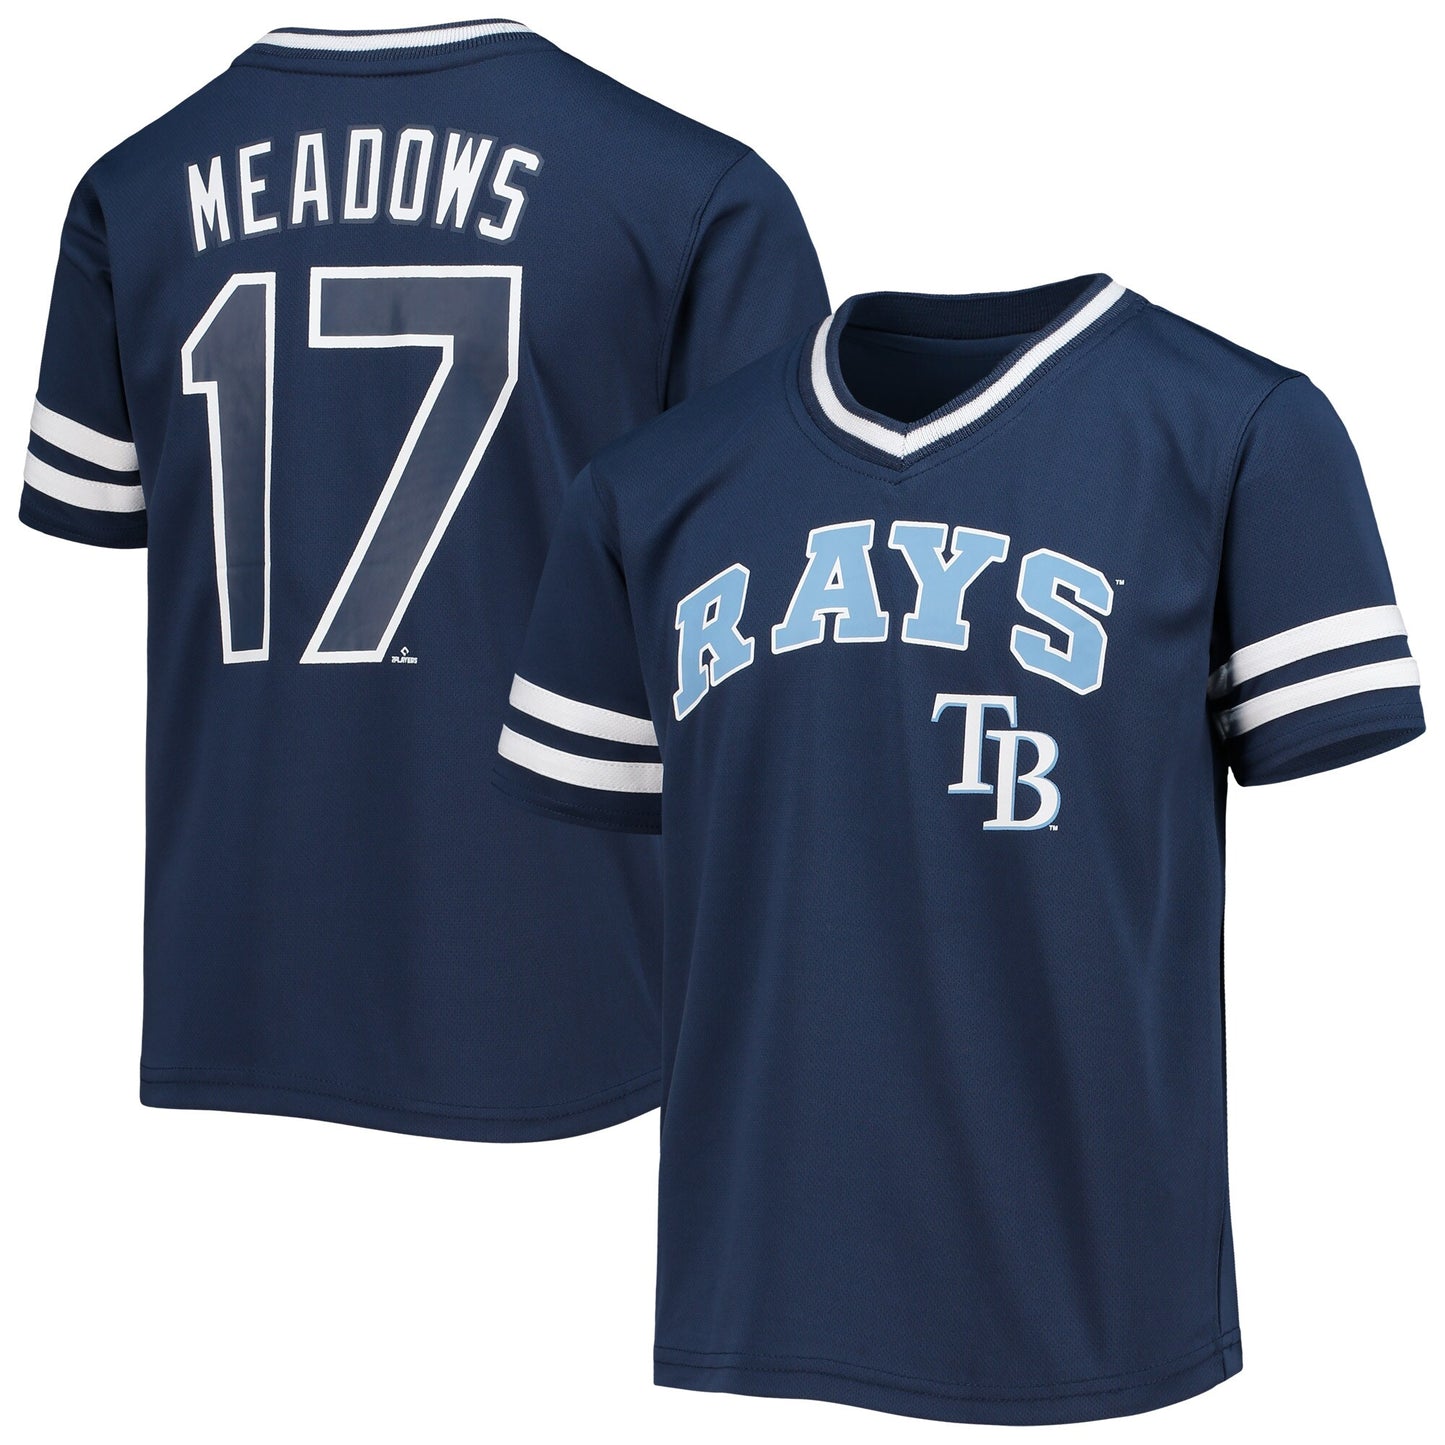 Youth Austin Meadows Navy Tampa Bay Rays Player Logo Jersey